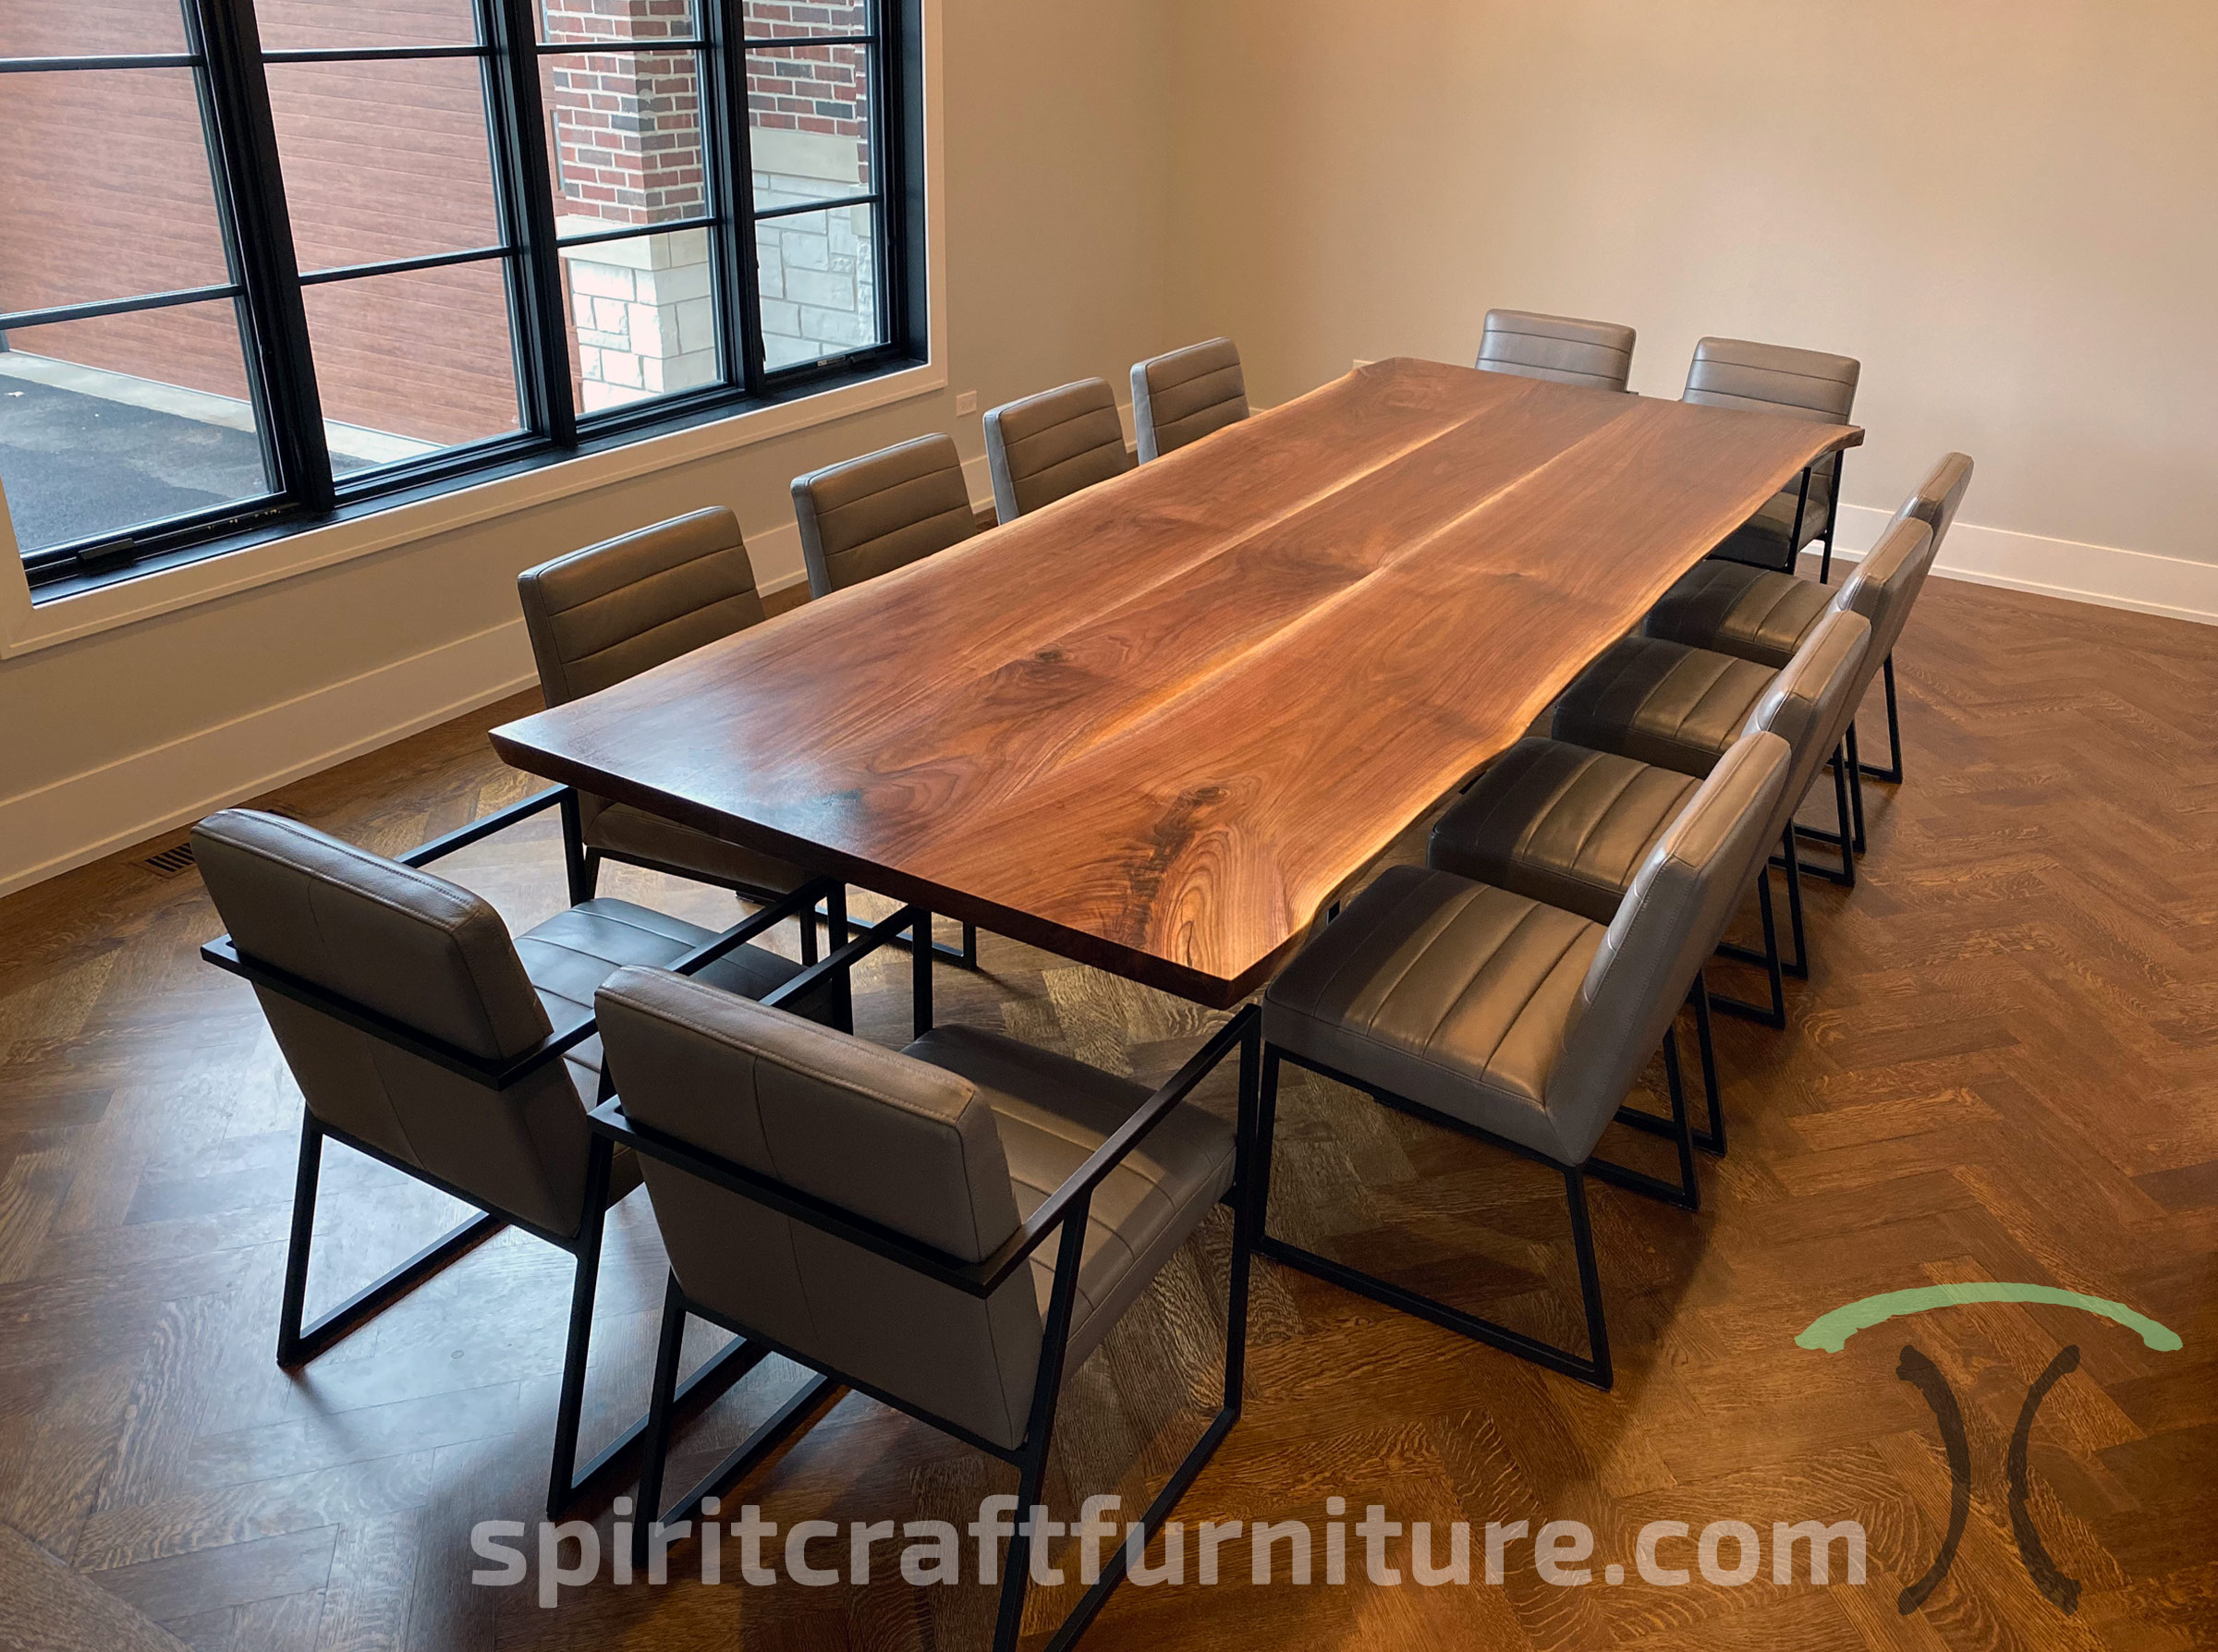 https://www.greatspirithardwoods.com/img/slab-live-edge-tops/large-black-walnut-live-edge-dining-table-for-chicago-il-area-client-with-modern-leather-and-steel-chairs.jpg